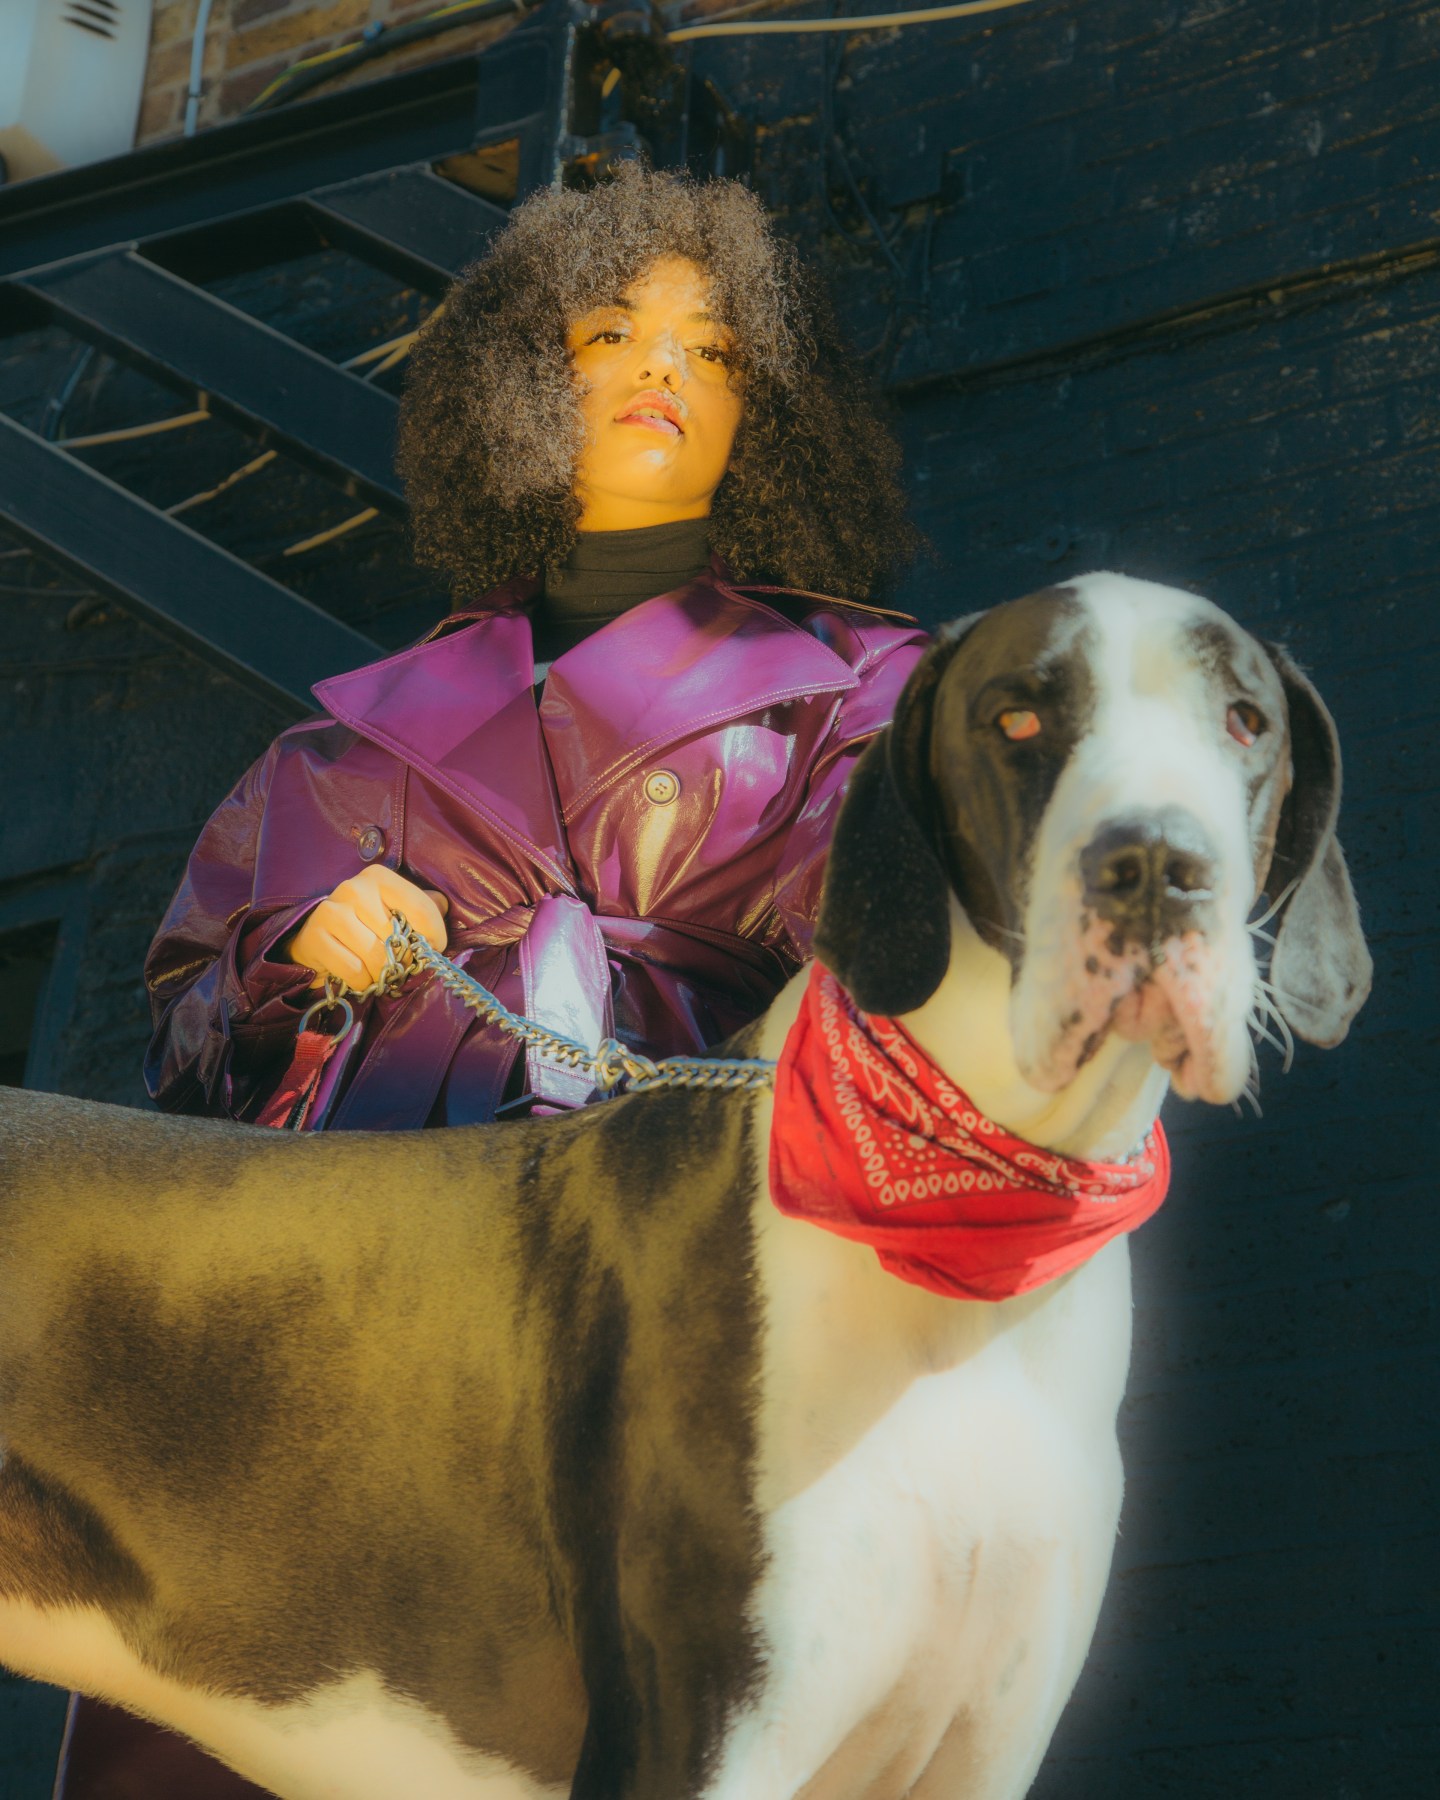 Mahalia’s honest, soulful pop is perfect for this moment